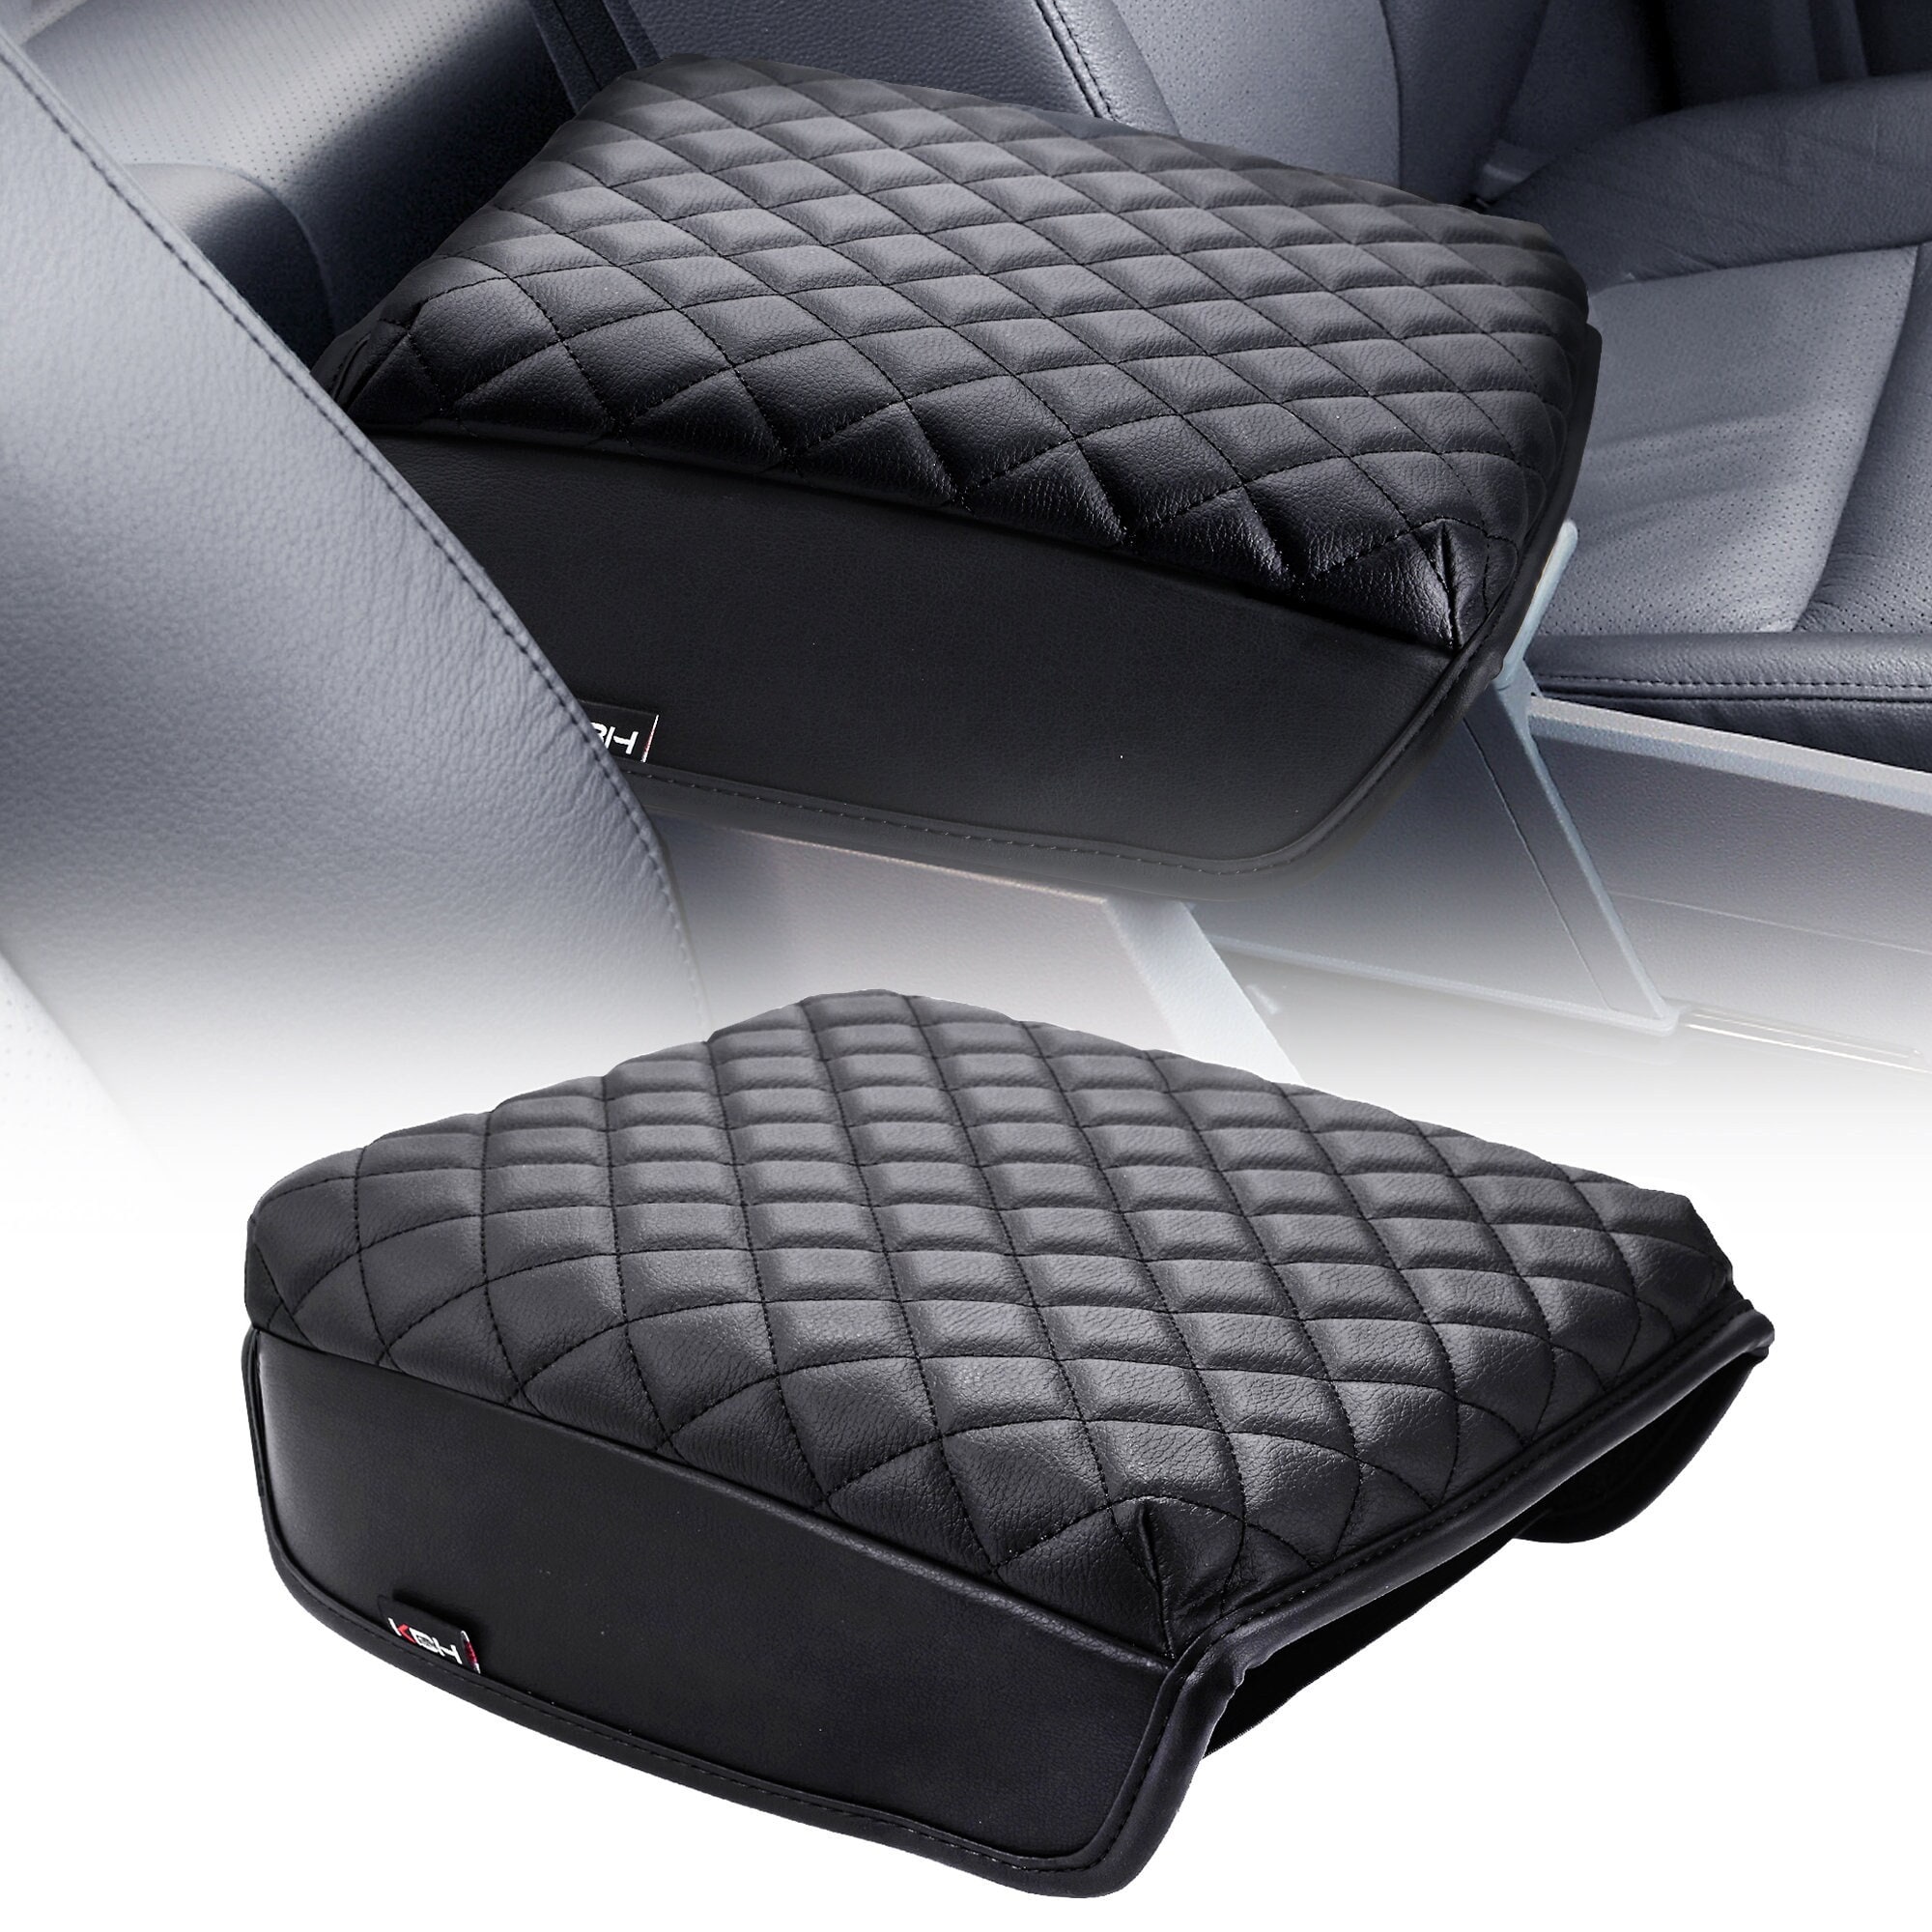 Center Console Arm-rest Cover Pad Universal Fit for SUV/Truck/Car, Car  Armrest Seat Box Cover, Leather Auto Armrest Cover Velvet black